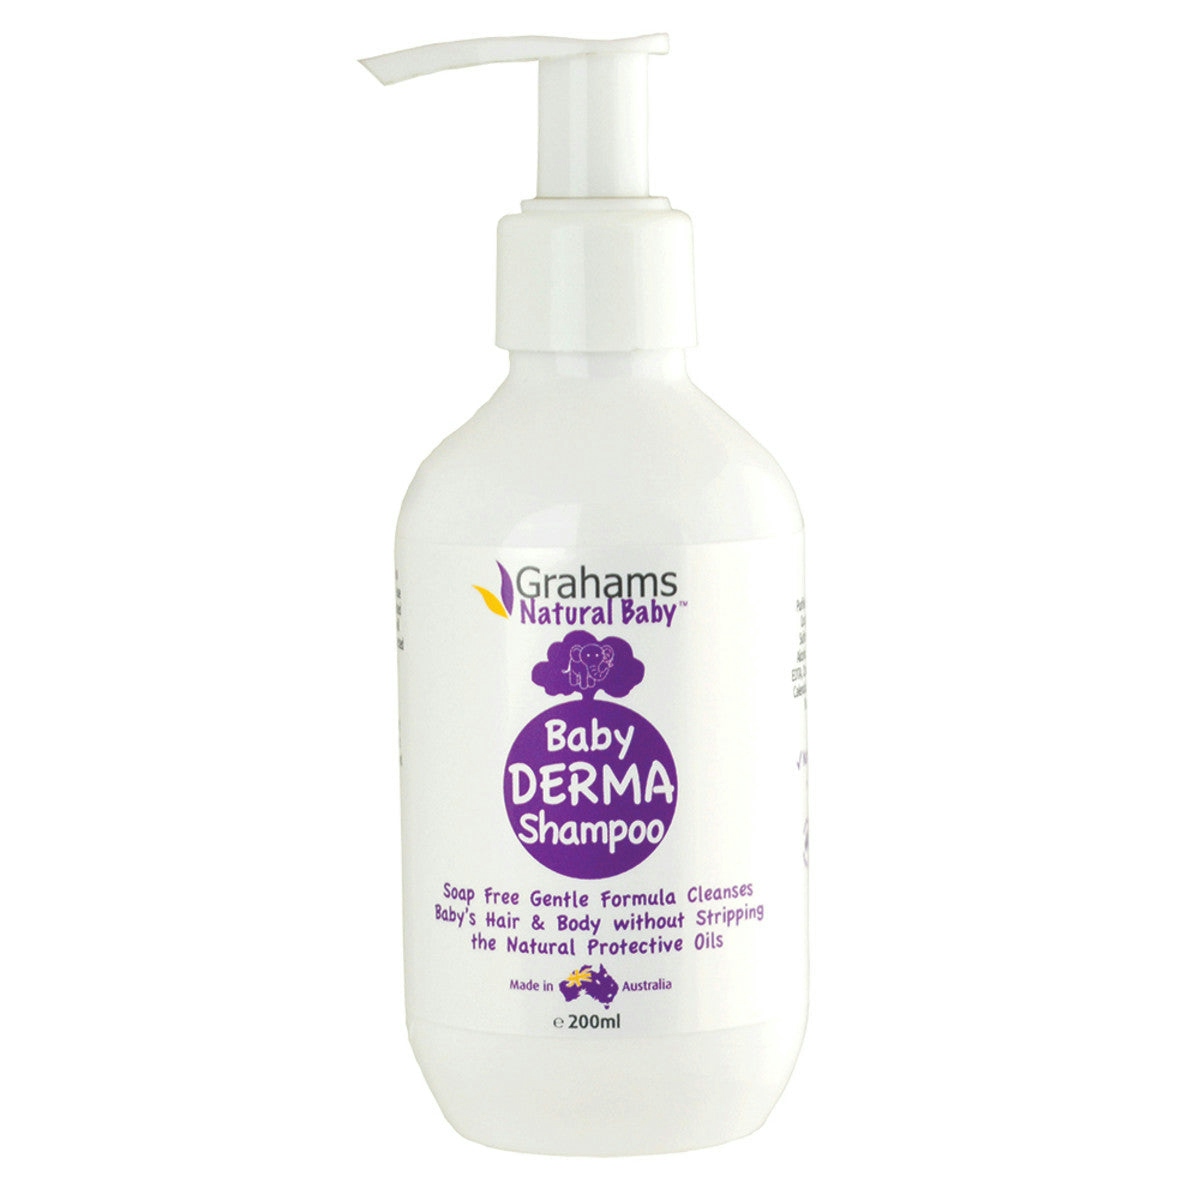 image of Grahams Natural Baby Derma Shampoo 200ml on white background 